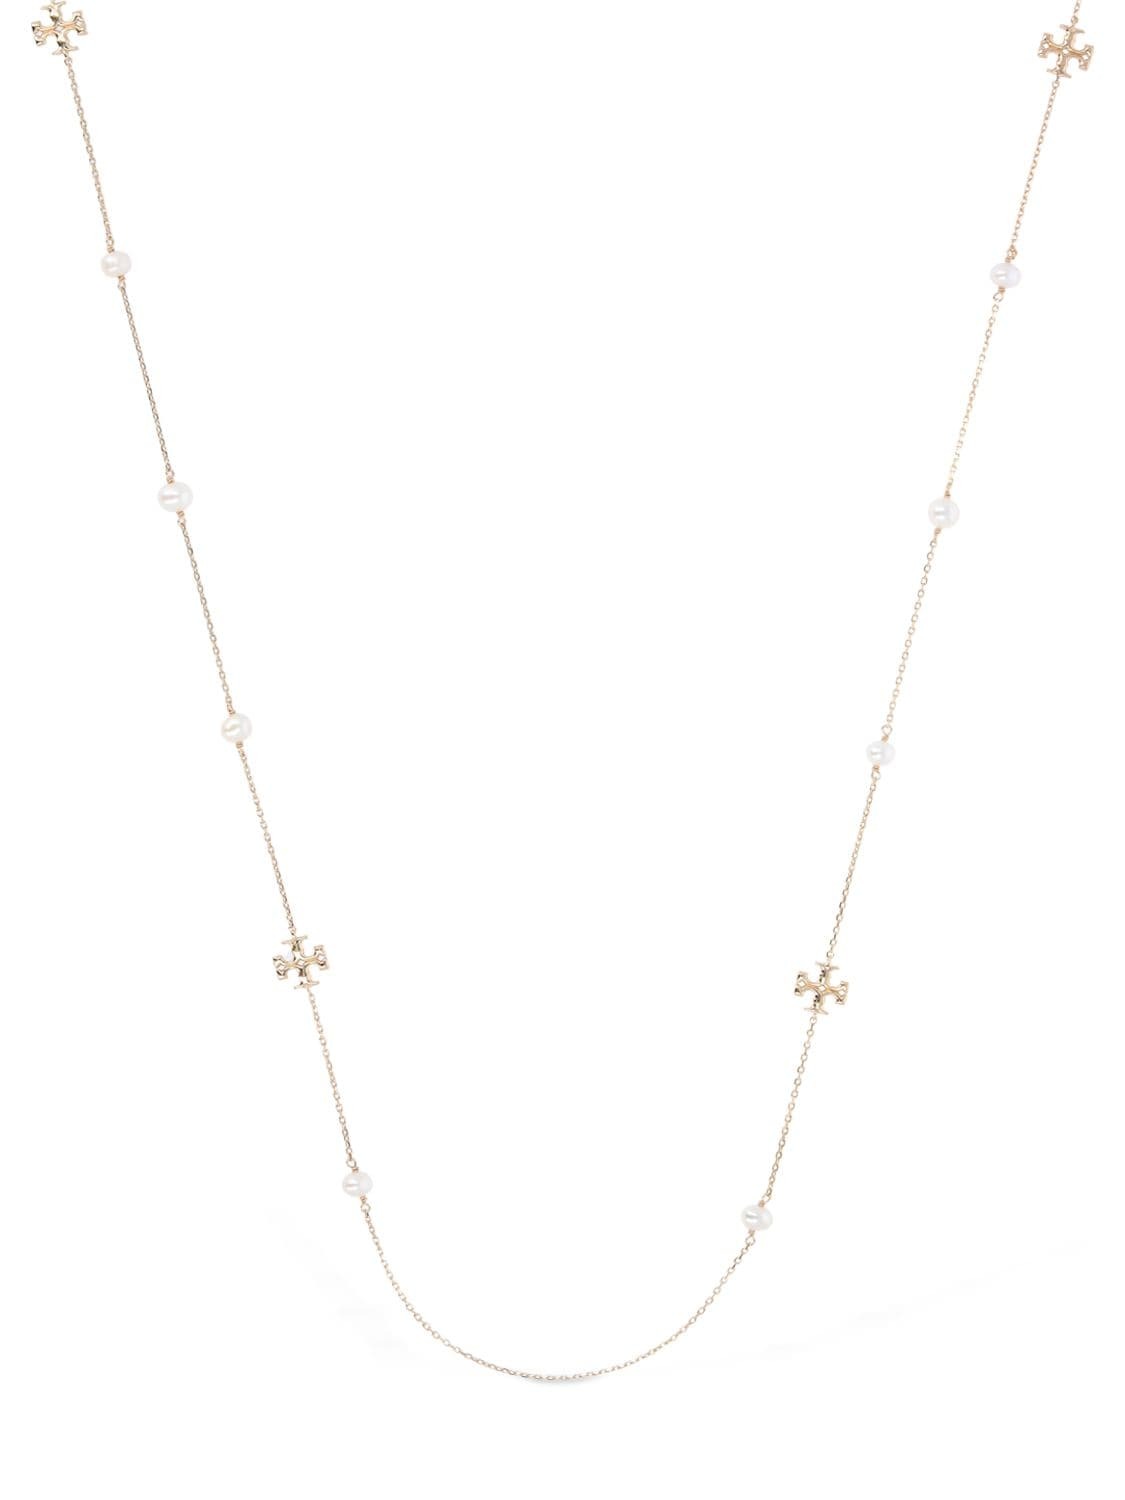 TORY BURCH Kira Imitation Pearl Delicate Necklace in gold / white